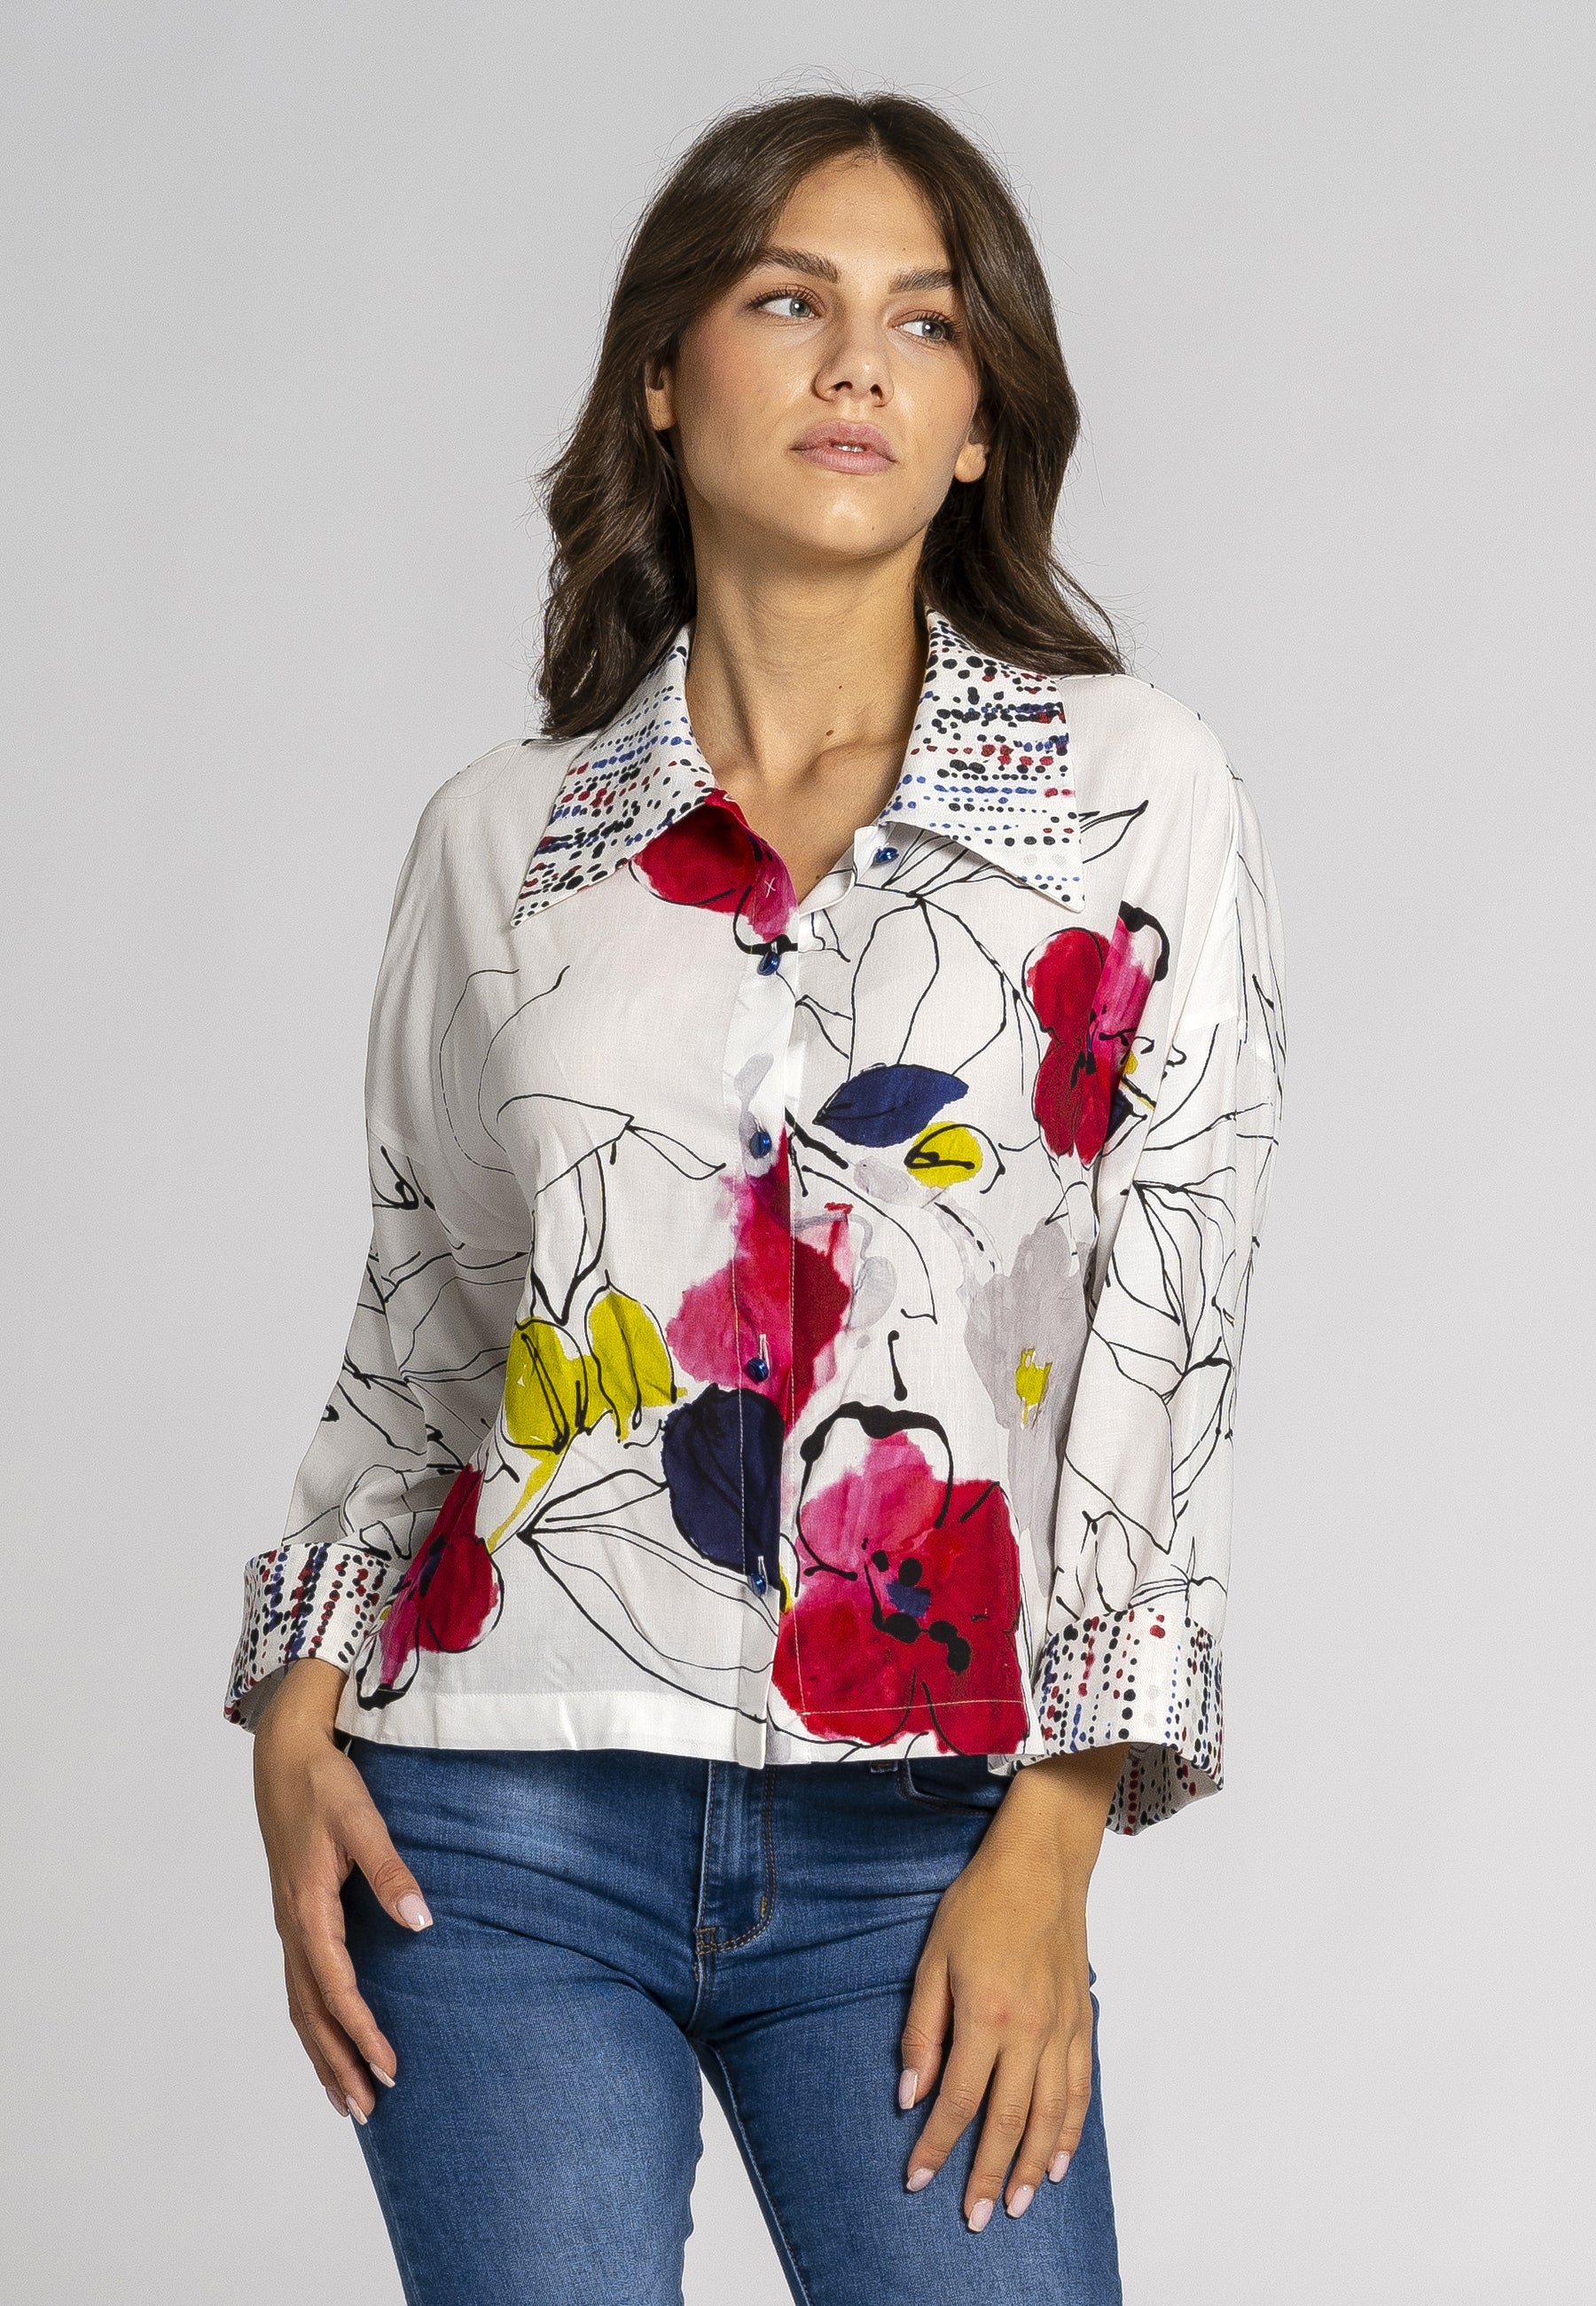 floral print shirt, viscose and linen shirt, oversized shirt, elbow sleeves, classic collar, combination of prints, Italian viscose and linen, luxury shirt, comfortable and breathable fabric, versatile shirt, stylish shirt, Primula trousers, Calla trousers, statement shirt, elevate your look